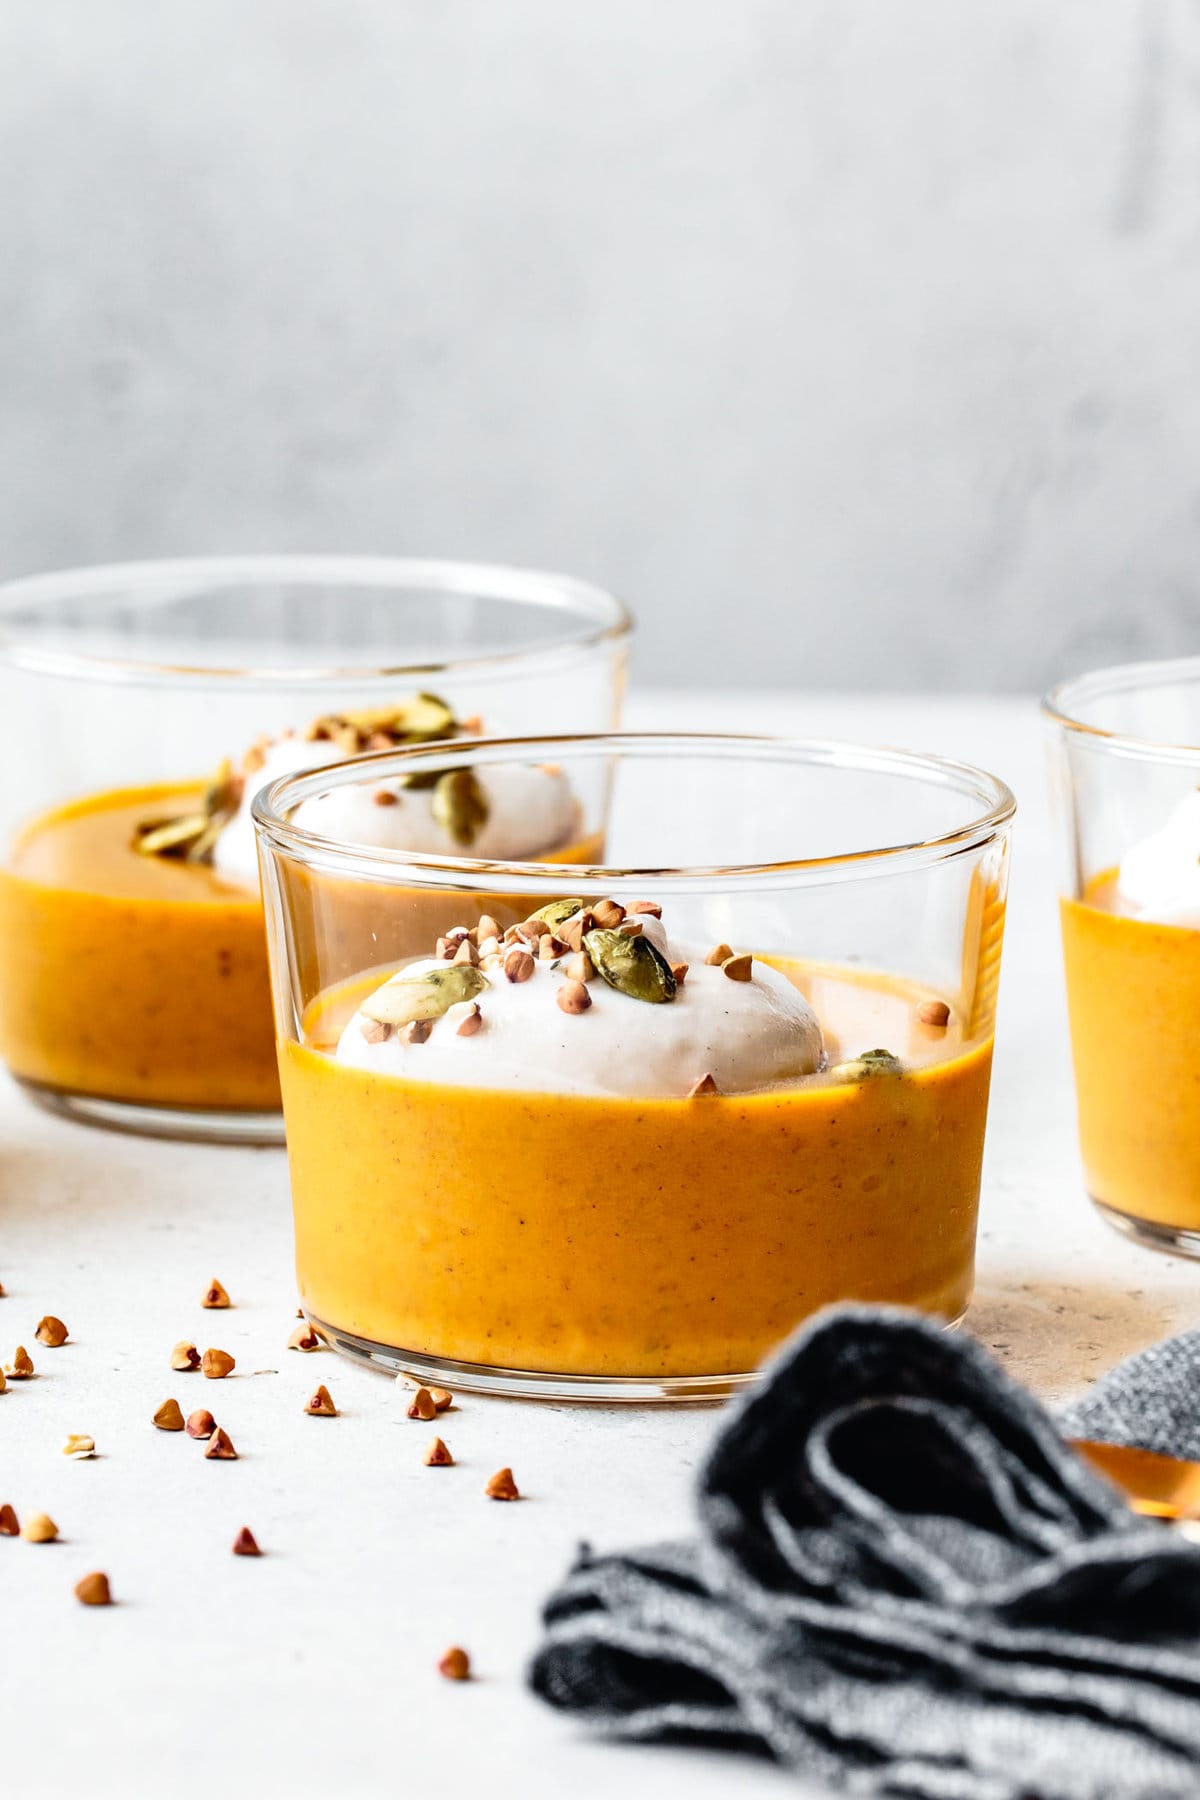 jars of golden pumpkin pudding sit on a light colored surface topped with plumes of cream and buckwheat groats